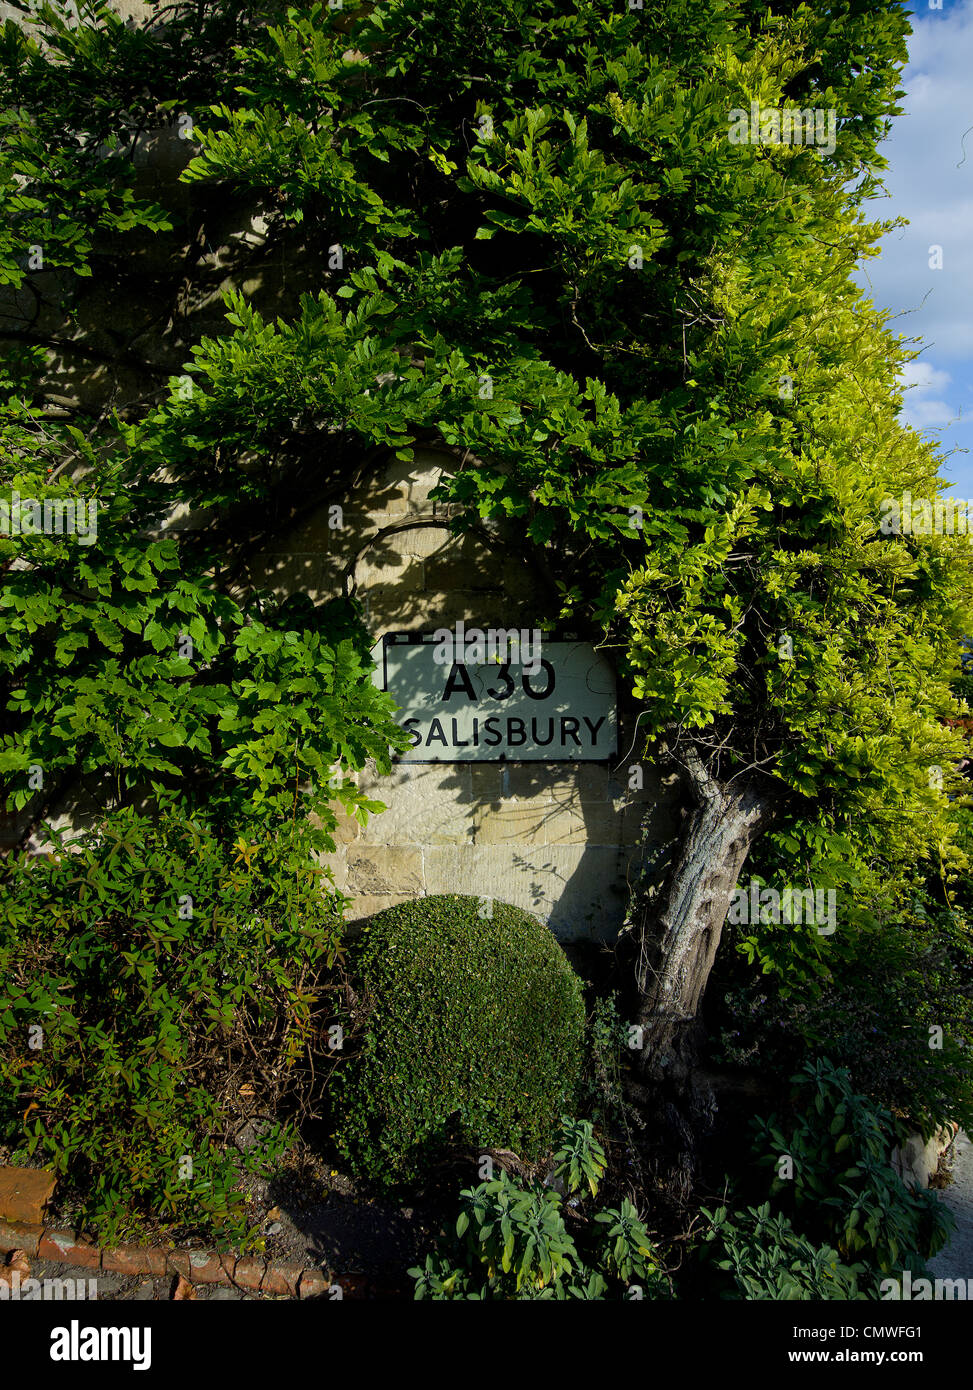 English British country A30 Salisbury road sign on building wall with greenery and plants Stock Photo